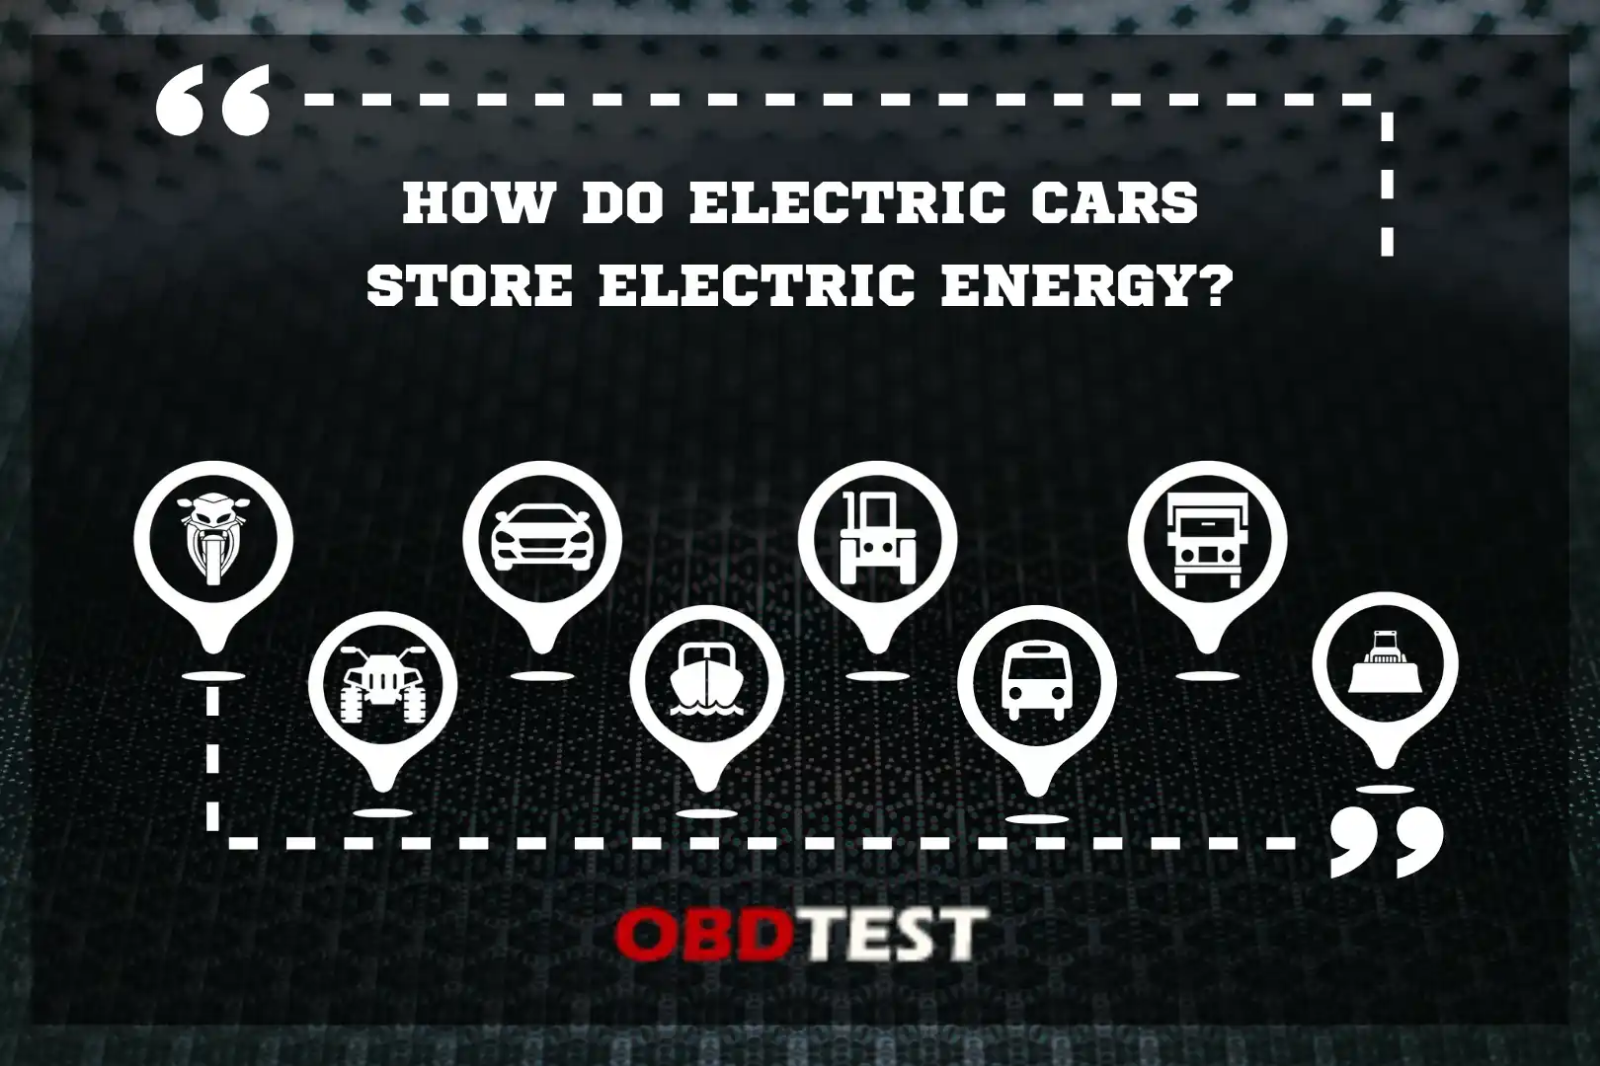 How do electric cars store electric energy?